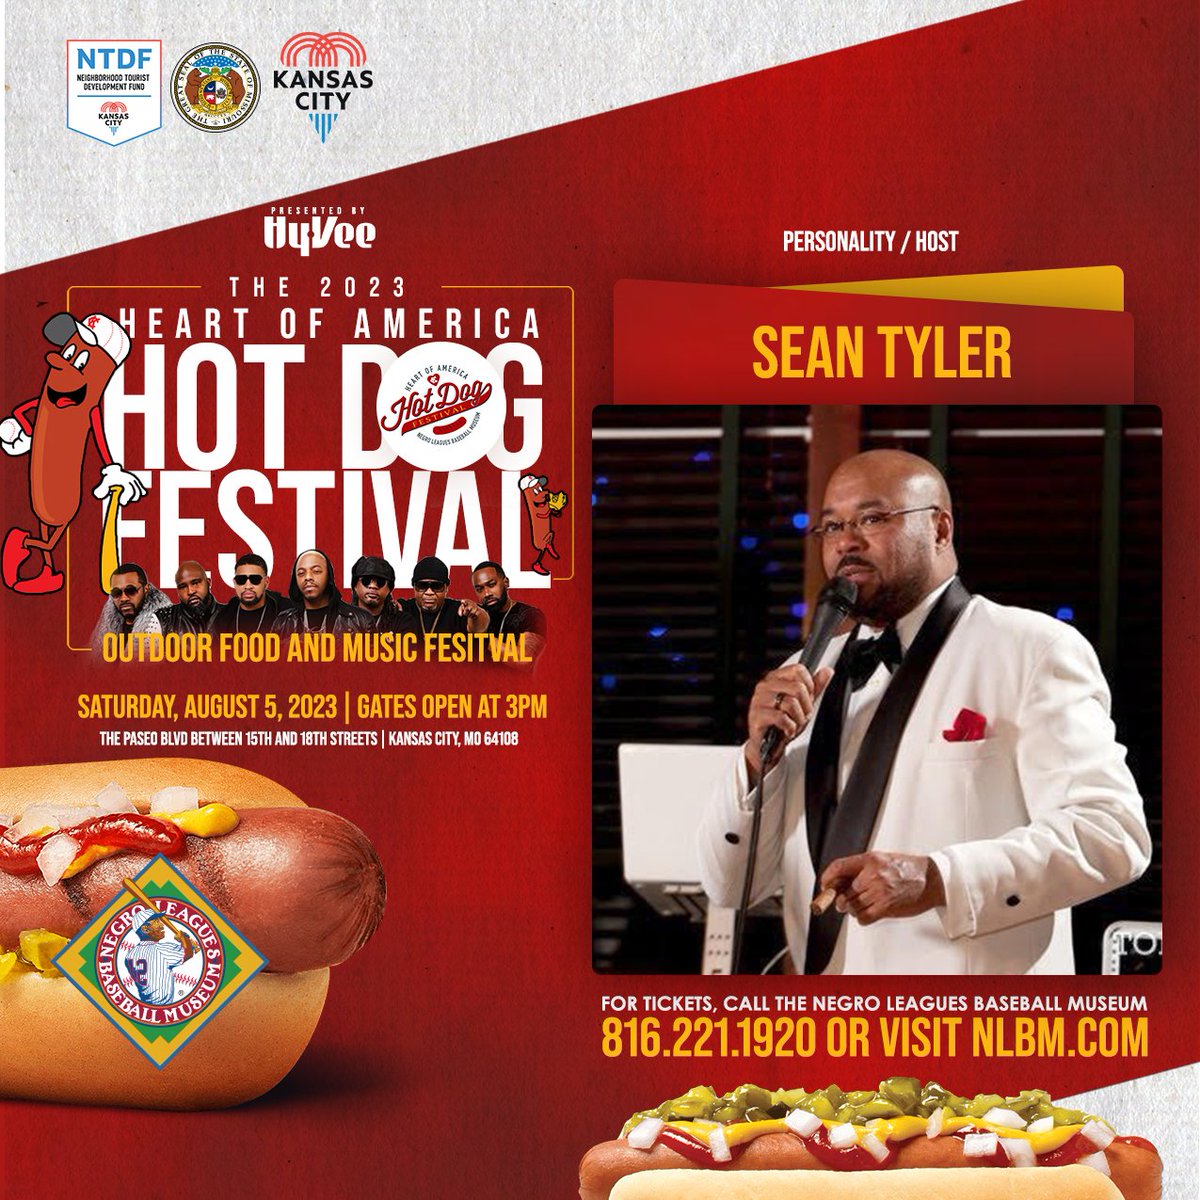 Only one place to be this weekend, @NLBMHotDogFest 😊 music, food, family, friends and fun! @HyVee @HyVeeKCMetro @NLBMuseumKC @nlbmprez #seeyouthere